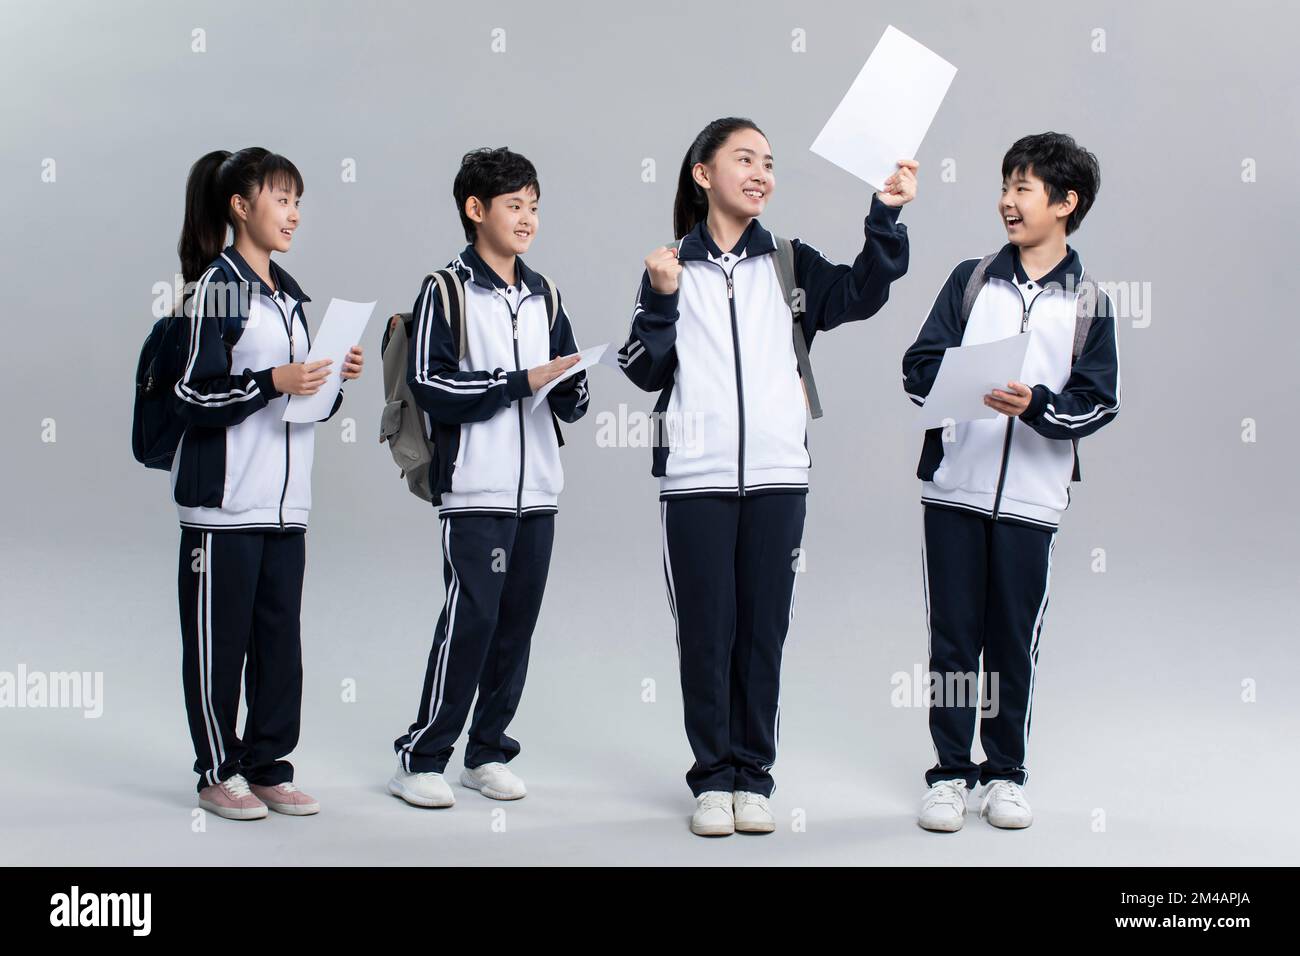 Cheerful Chinese students in uniform celebrating for their test results Stock Photo